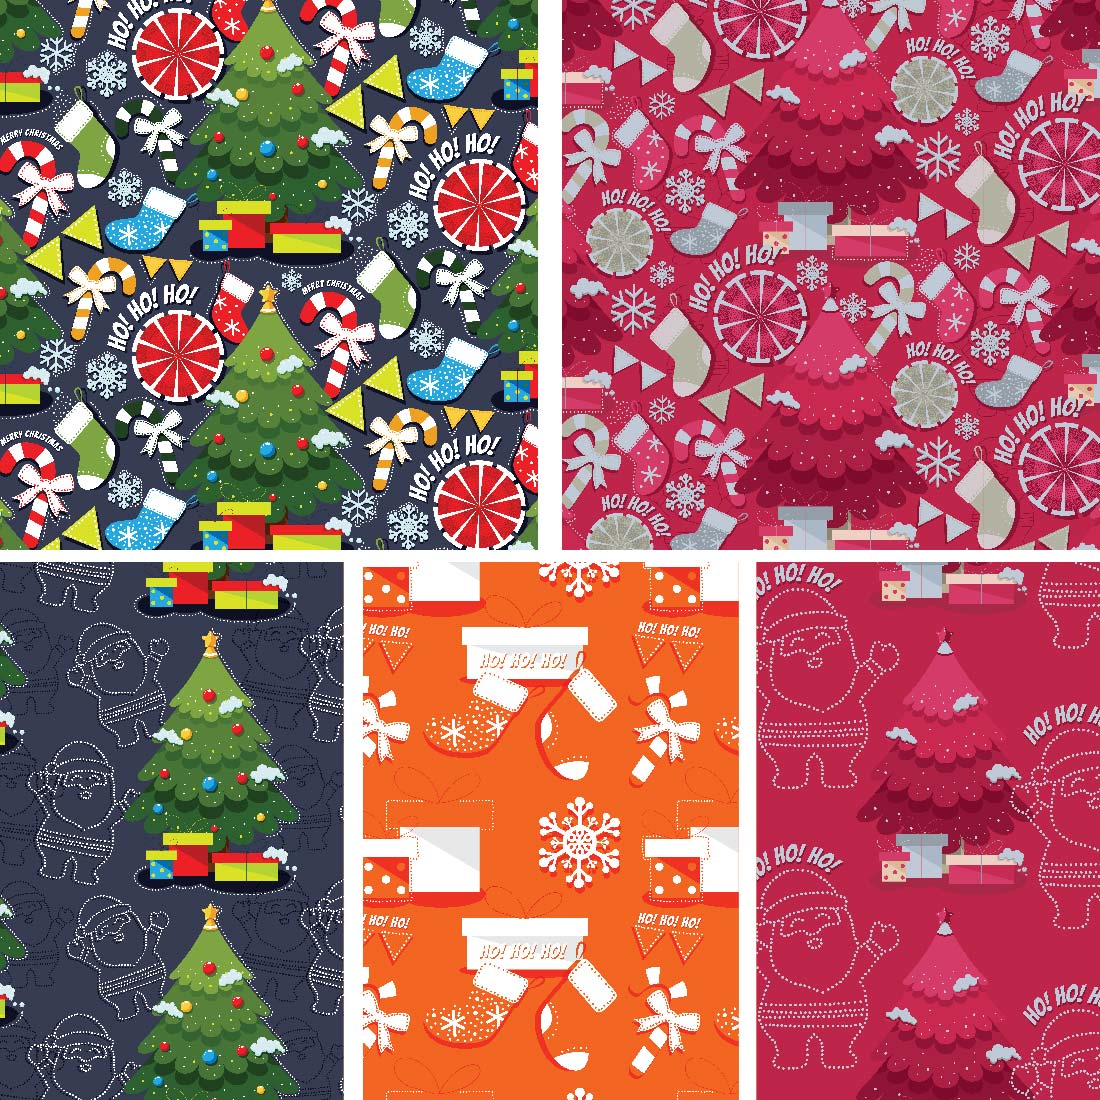 Colourful Seamless Christmas Digital Pattern Design cover image.